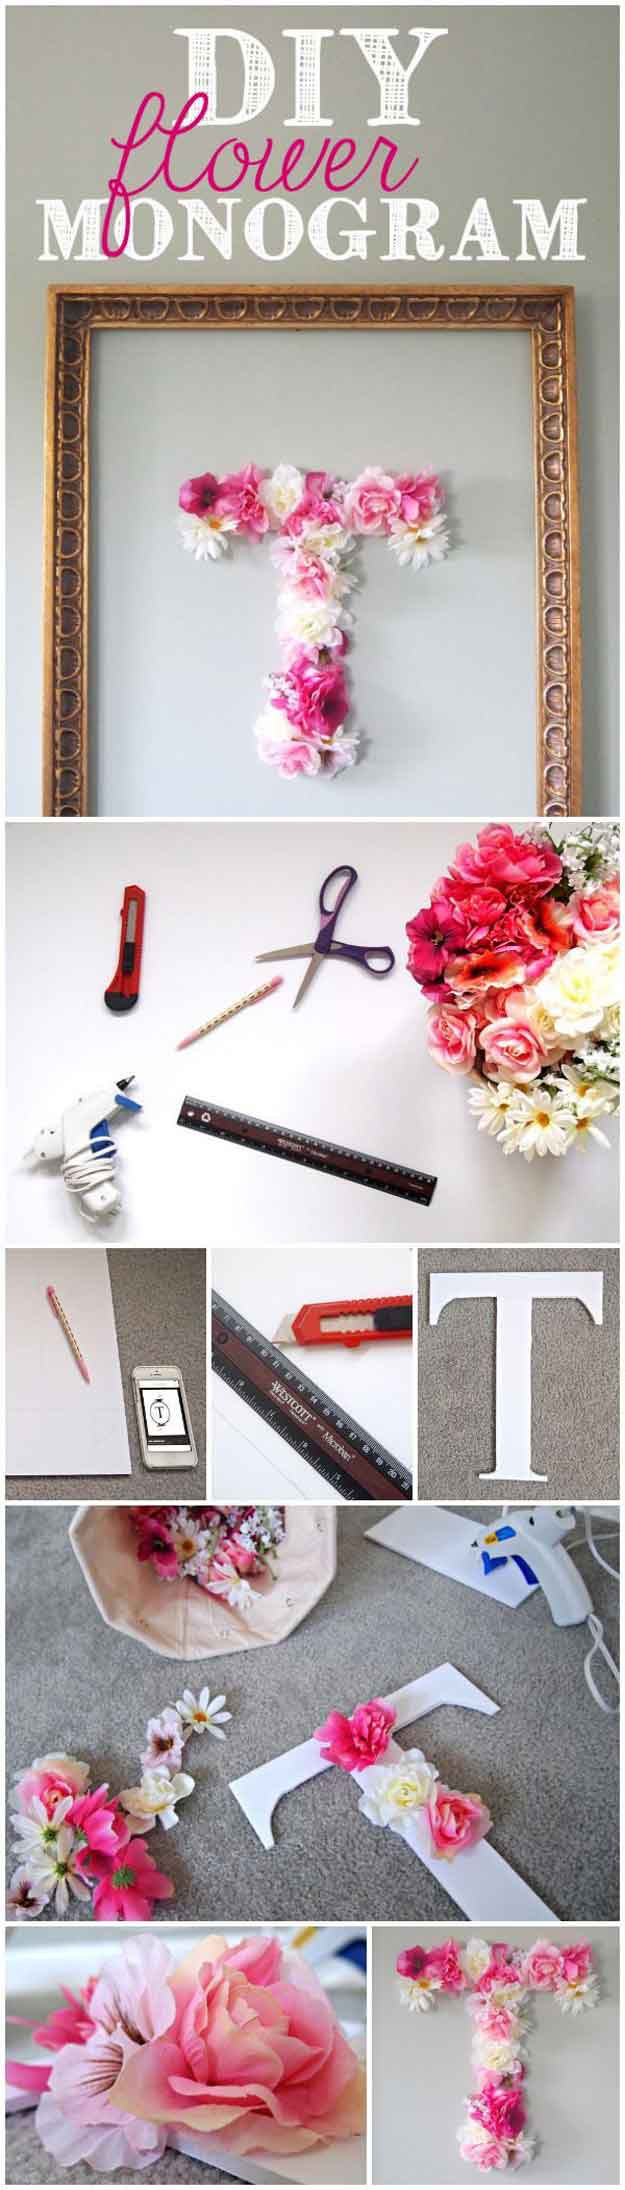 DIY Room Decorating Projects
 DIY Projects for Teens Bedroom DIY Ready